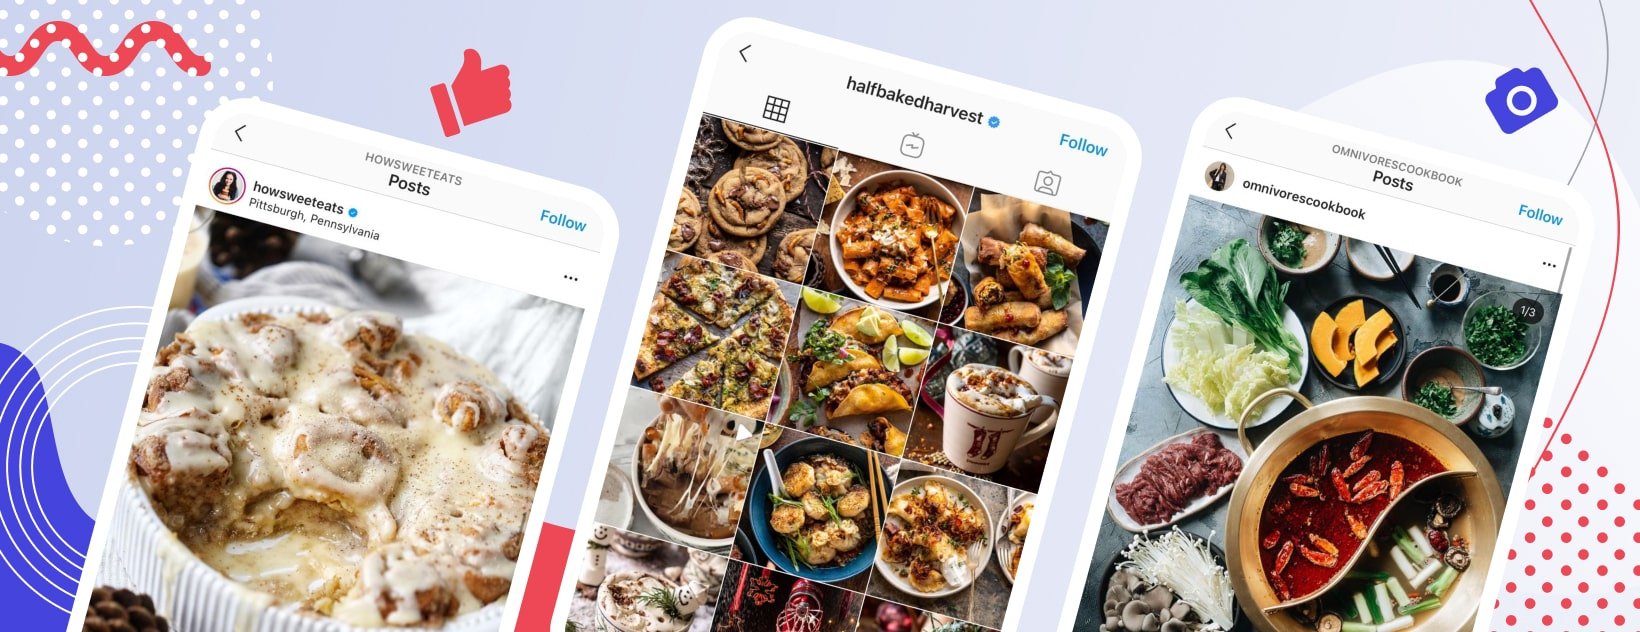 3 Instagram food accounts: their promotion hacks & 30 food hashtags (munchies and follower growth guaranteed!)